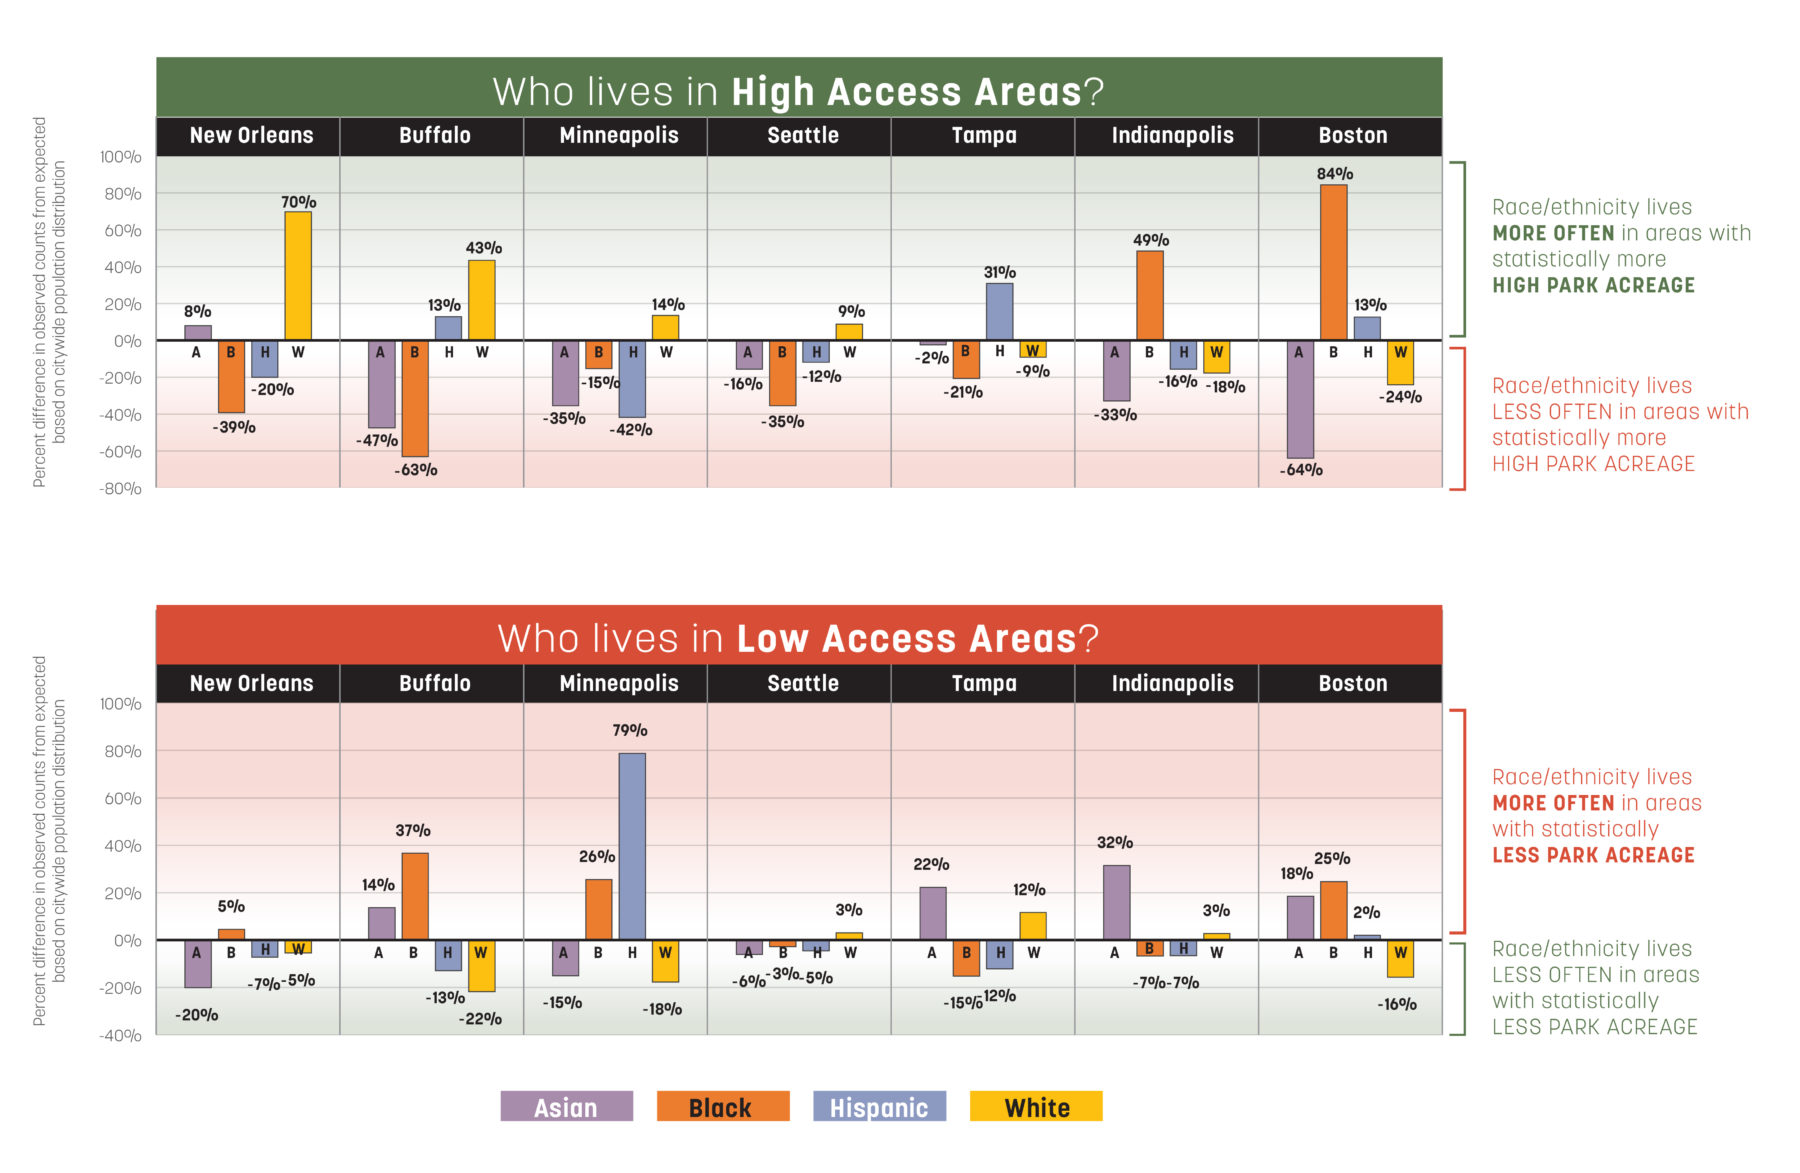 chart showing the demographics of people who live in high and low access areas across different cities